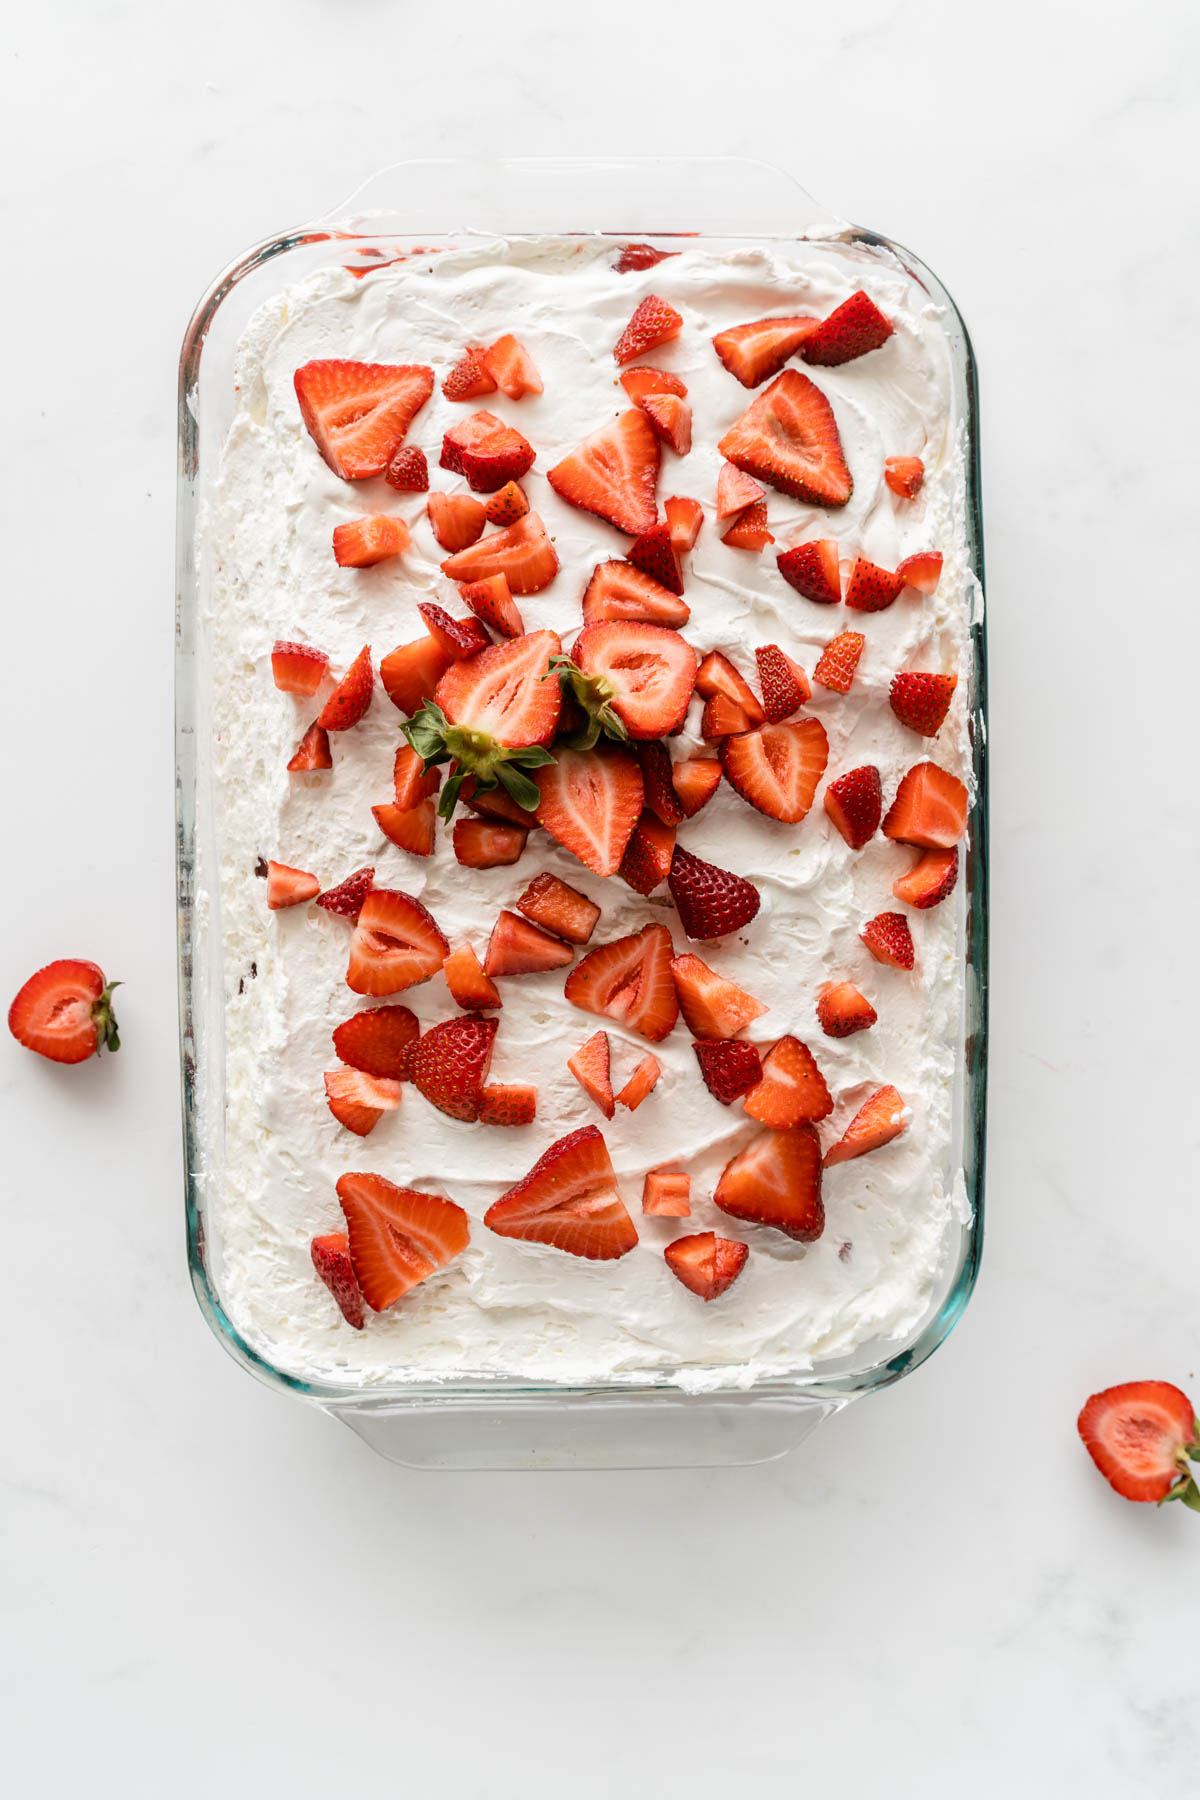 A glass dish of dessert topped with whipped cream and fresh sliced strawberries.